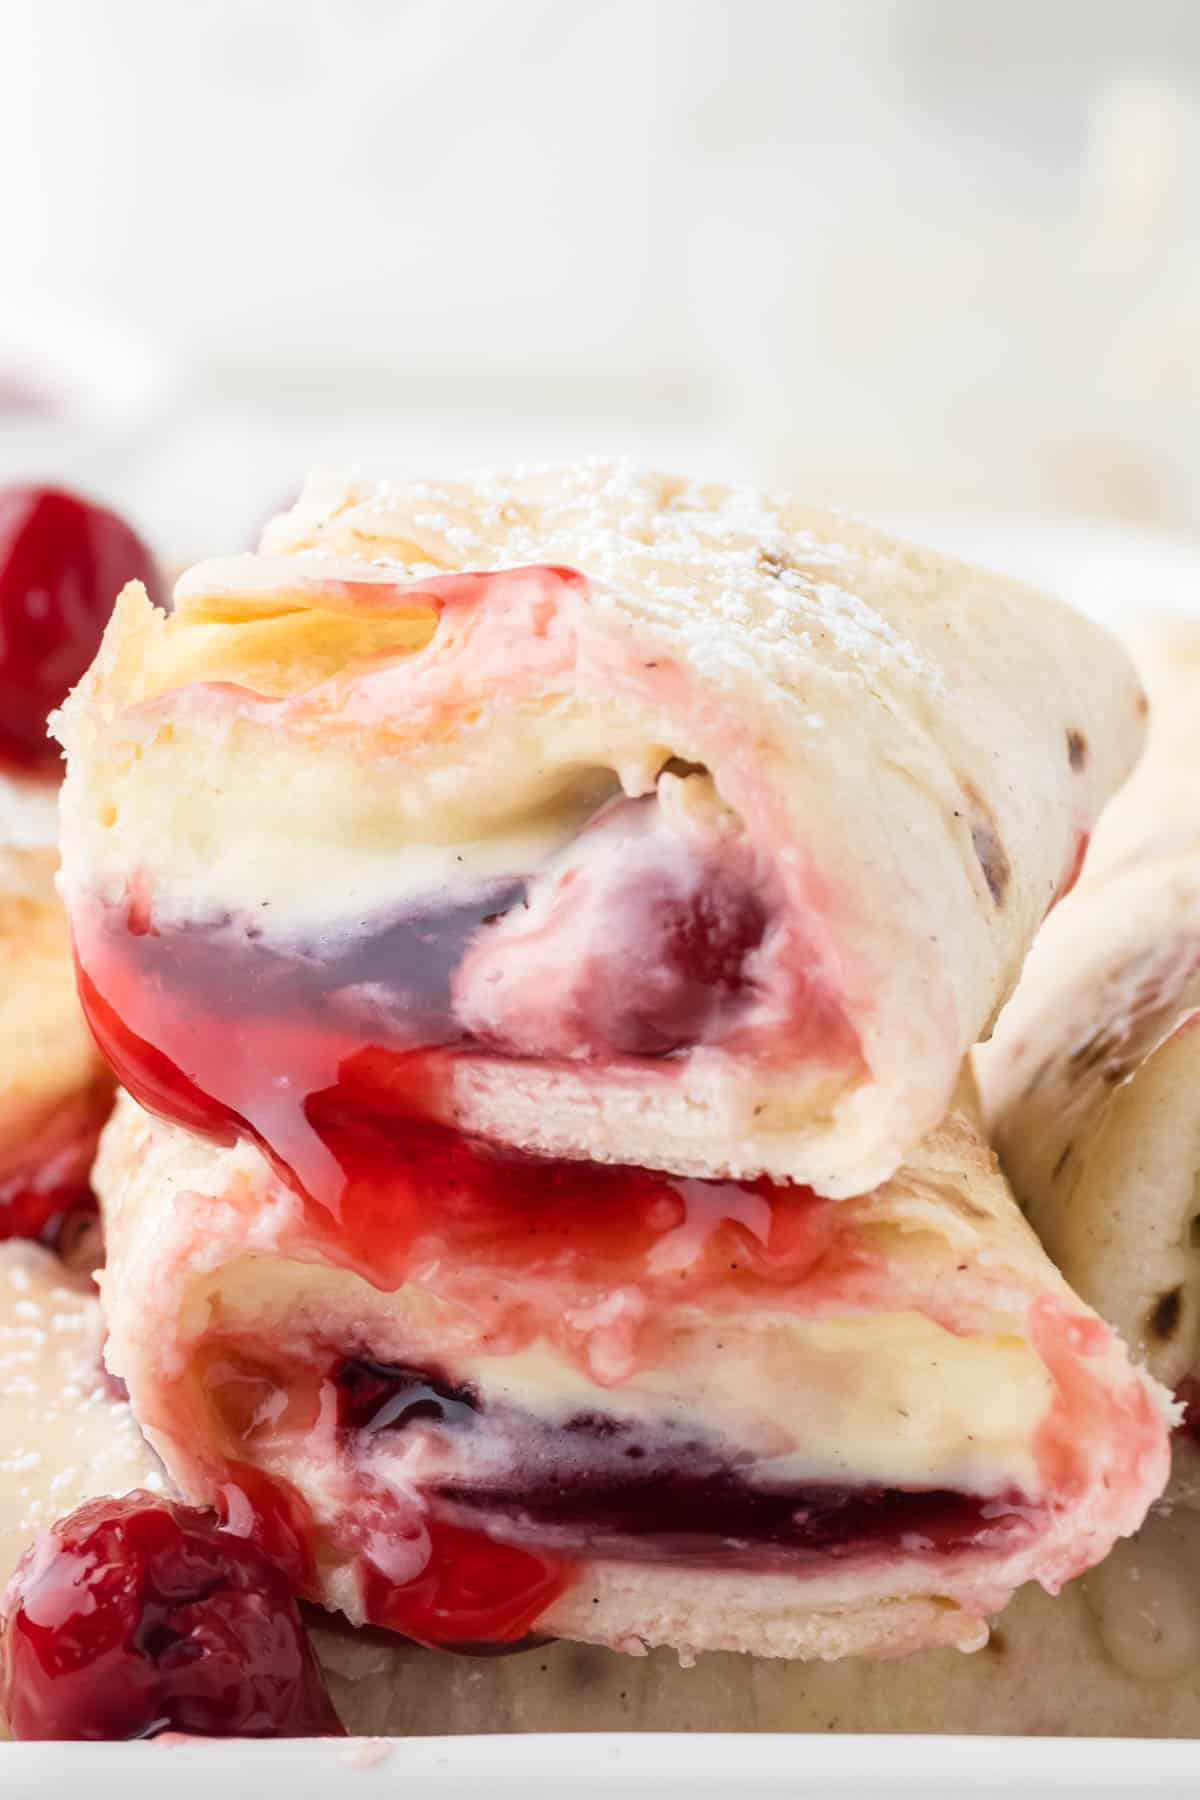 A close image of cherry cheesecake filling in crispy tortilla shells.